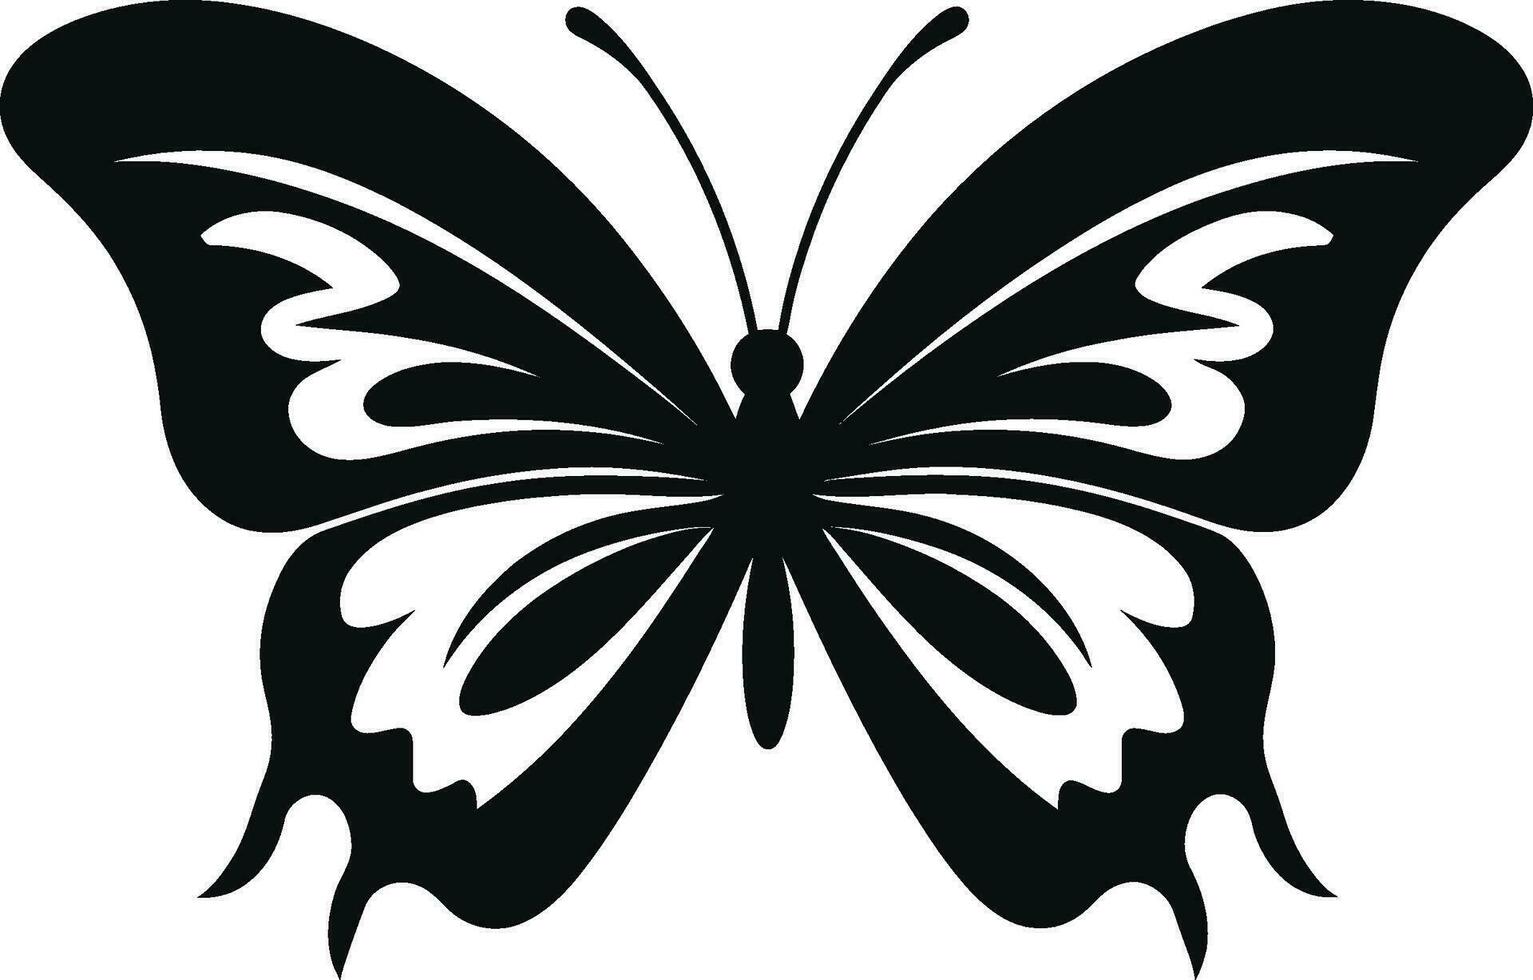 Sculpted Silhouette in Flight Monochrome Marvel Skybound Majesty Midnight Butterfly Icon vector